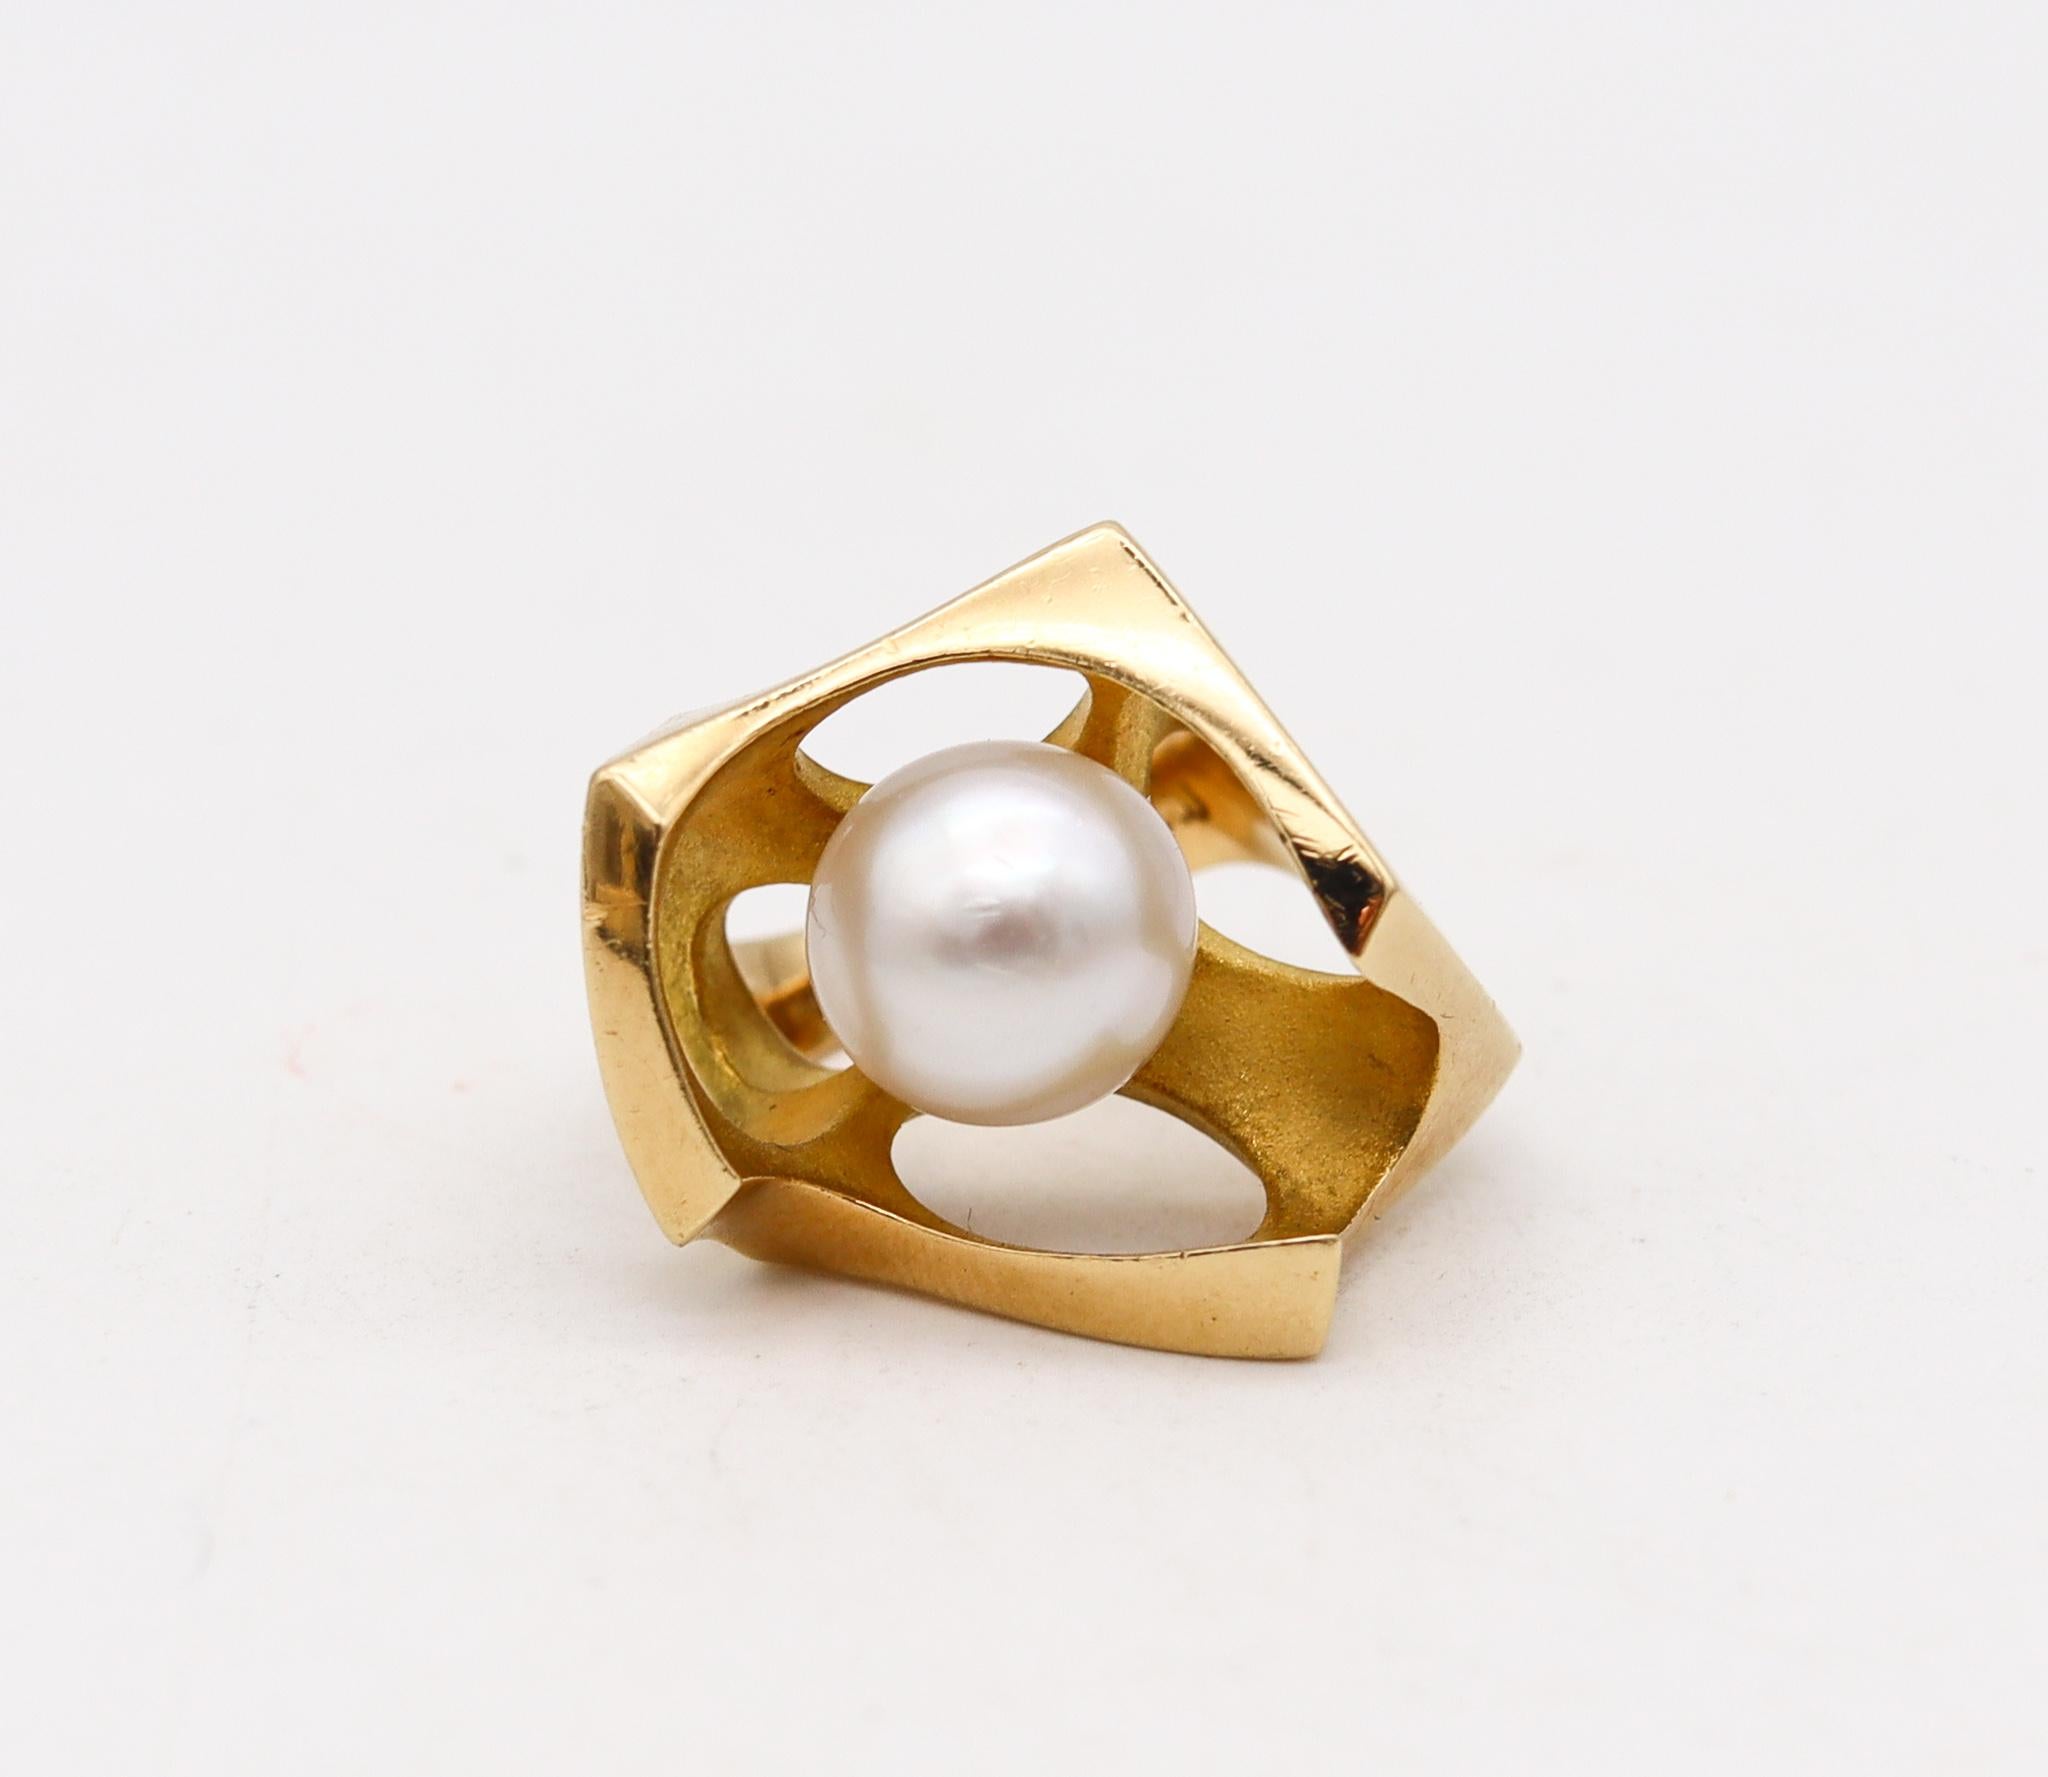 An sculptural free form abstract cocktail ring.

Impressive bold and sculptural biomorphic abstract cocktail ring, crafted in solid yellow gold of 18 karats with polished and brushed finishes. From the authorship of a designer or sculptor not yet